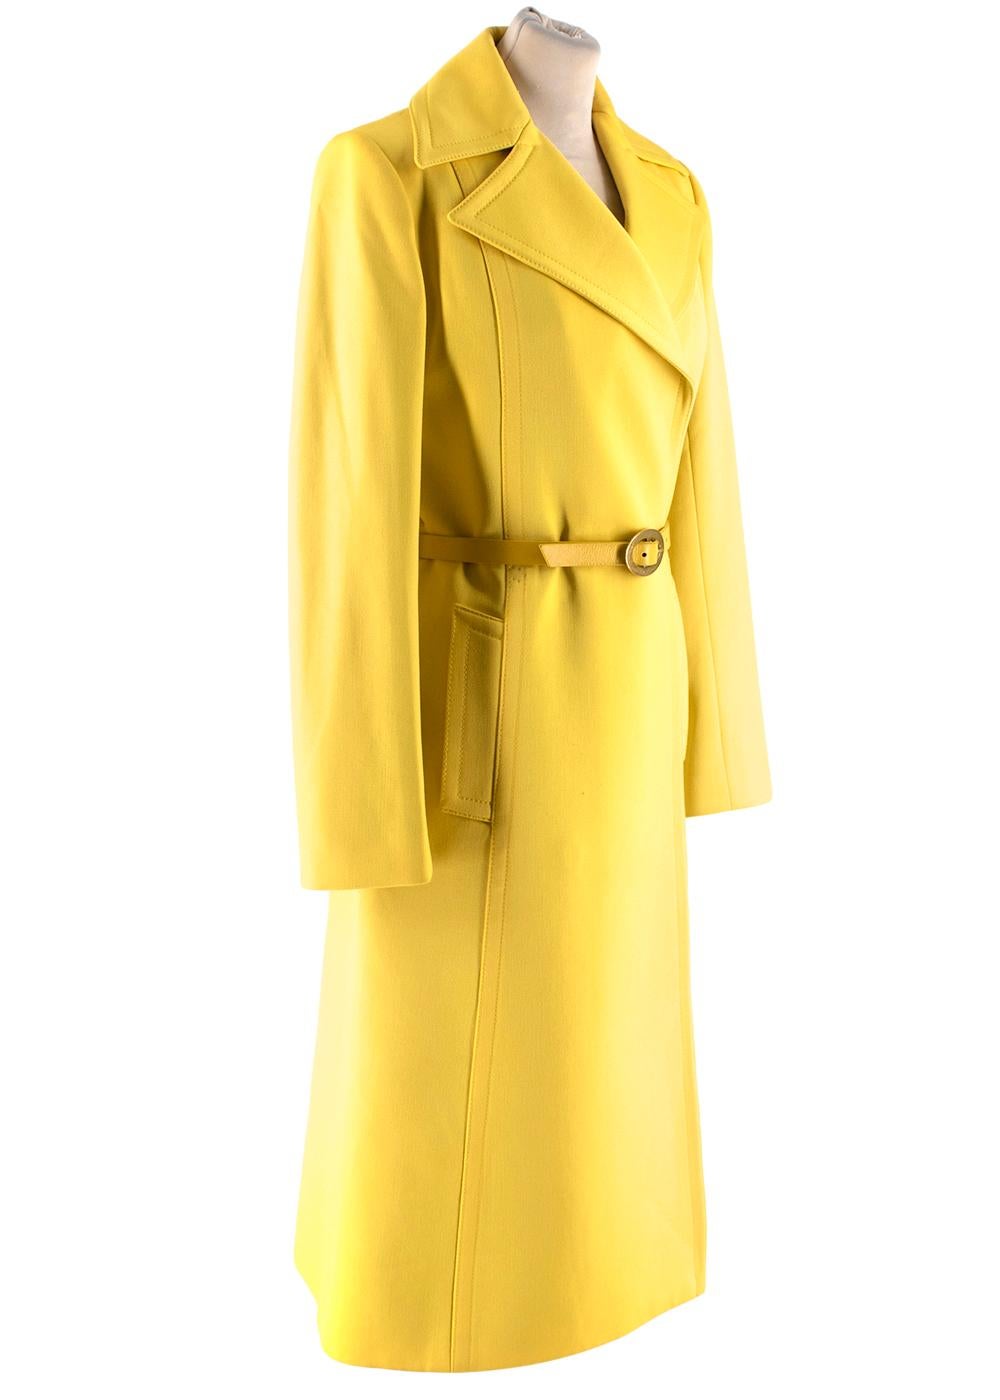 Dolce & Gabbana Yellow Belted Virgin Wool & Cashmere Coat

- Classic Trench Coat Style 
- x2 Outer Side Pockets 
- Silver Hardware Detail 
- Oversize Collared Detail 
- Yellow Leather Belt 

Made in Italy 

Length - 109cm
Sleeve - 61cm
Chest - 38cm